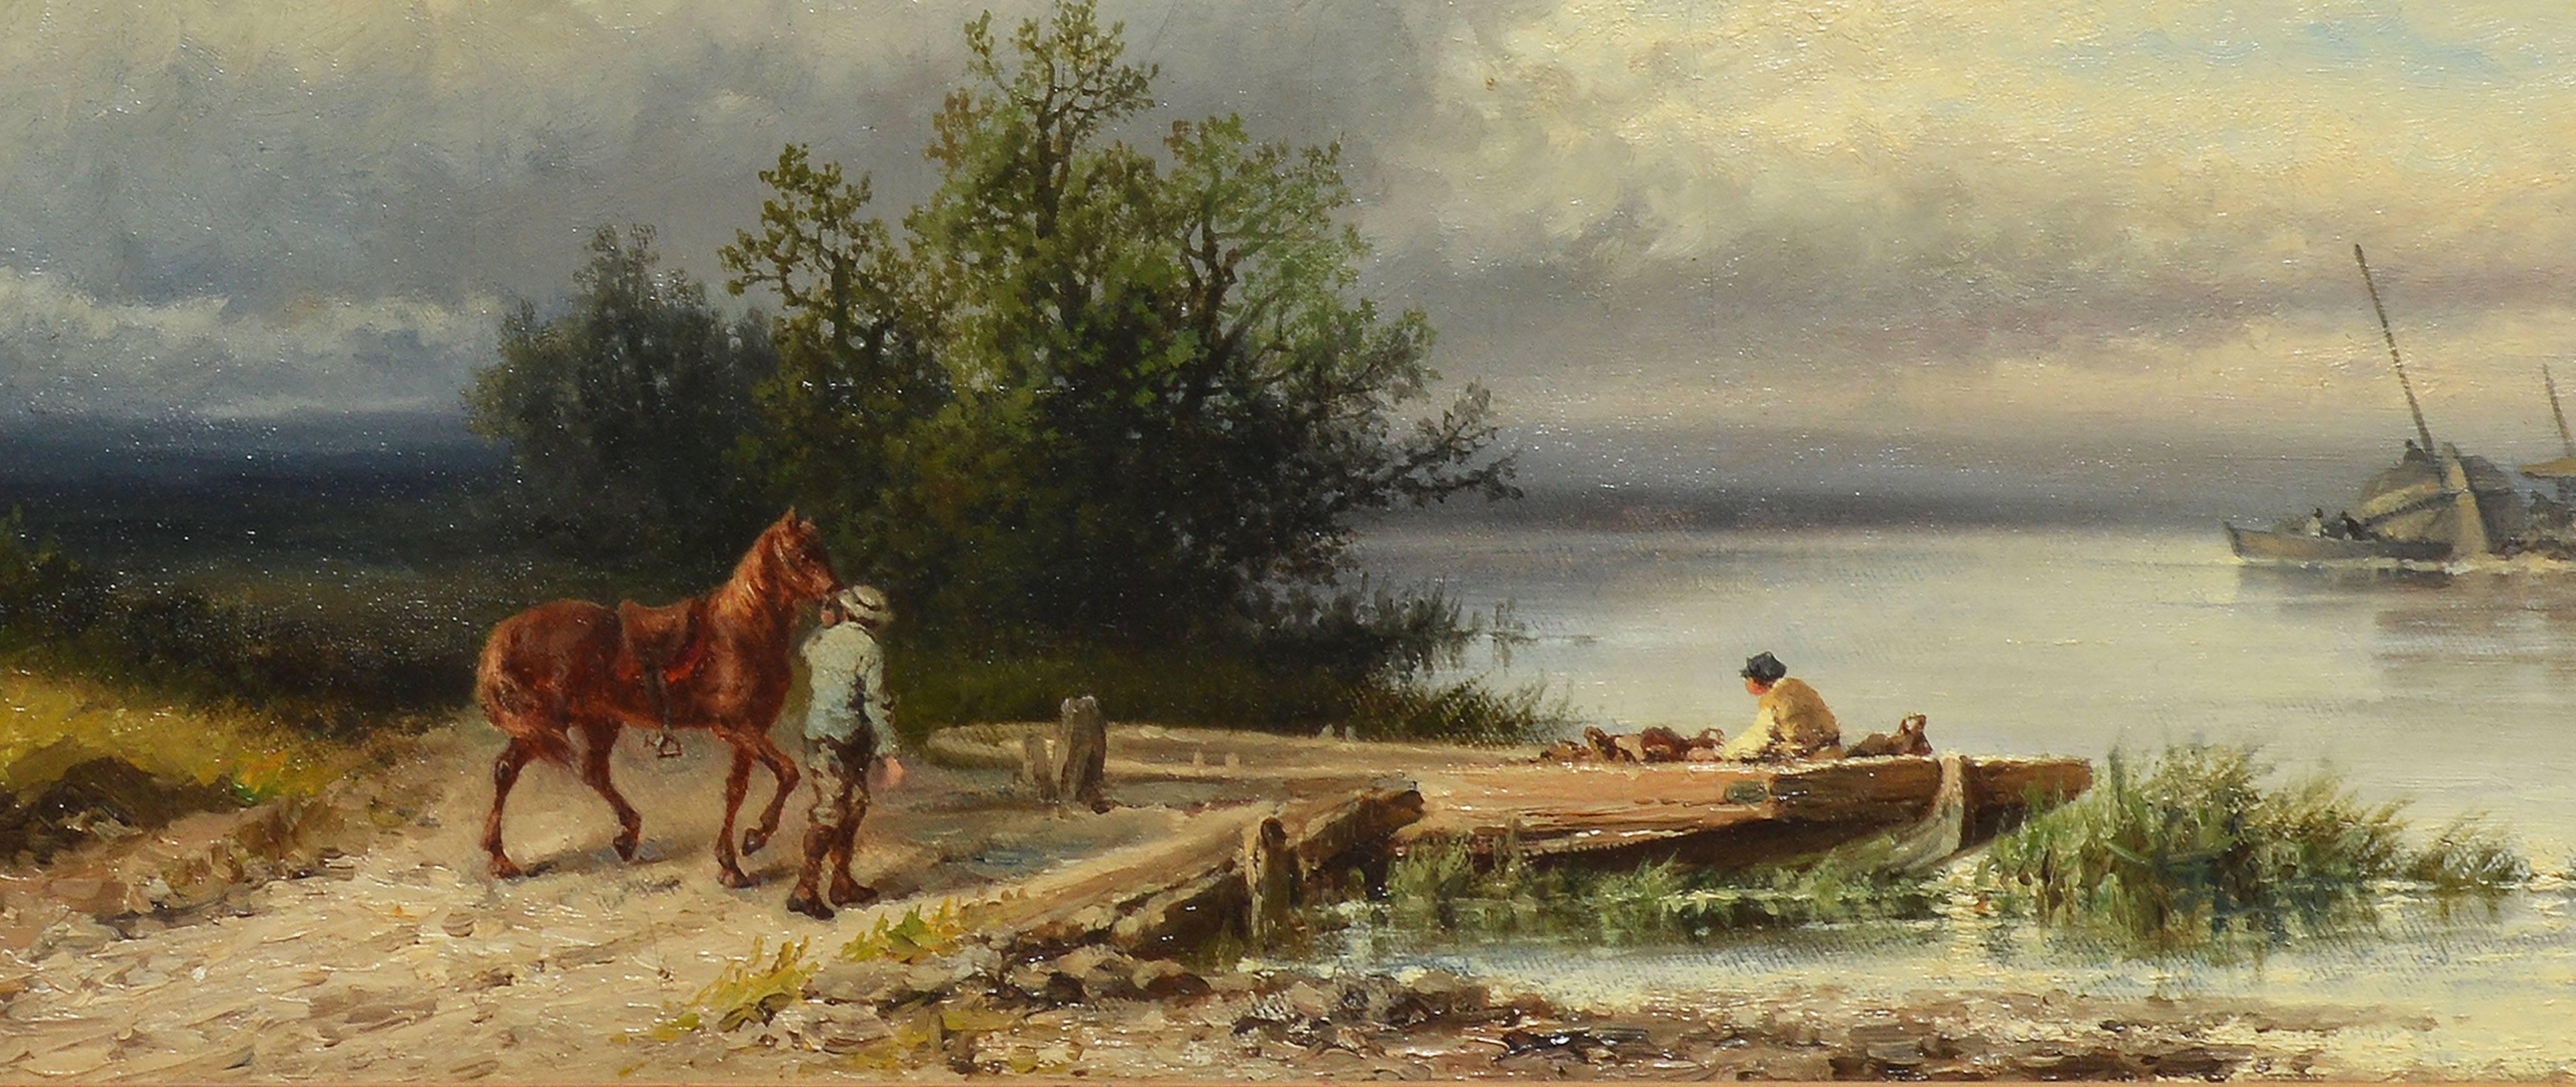 Walking the Hudson River  - Hudson River School Painting by William Henry Cooper